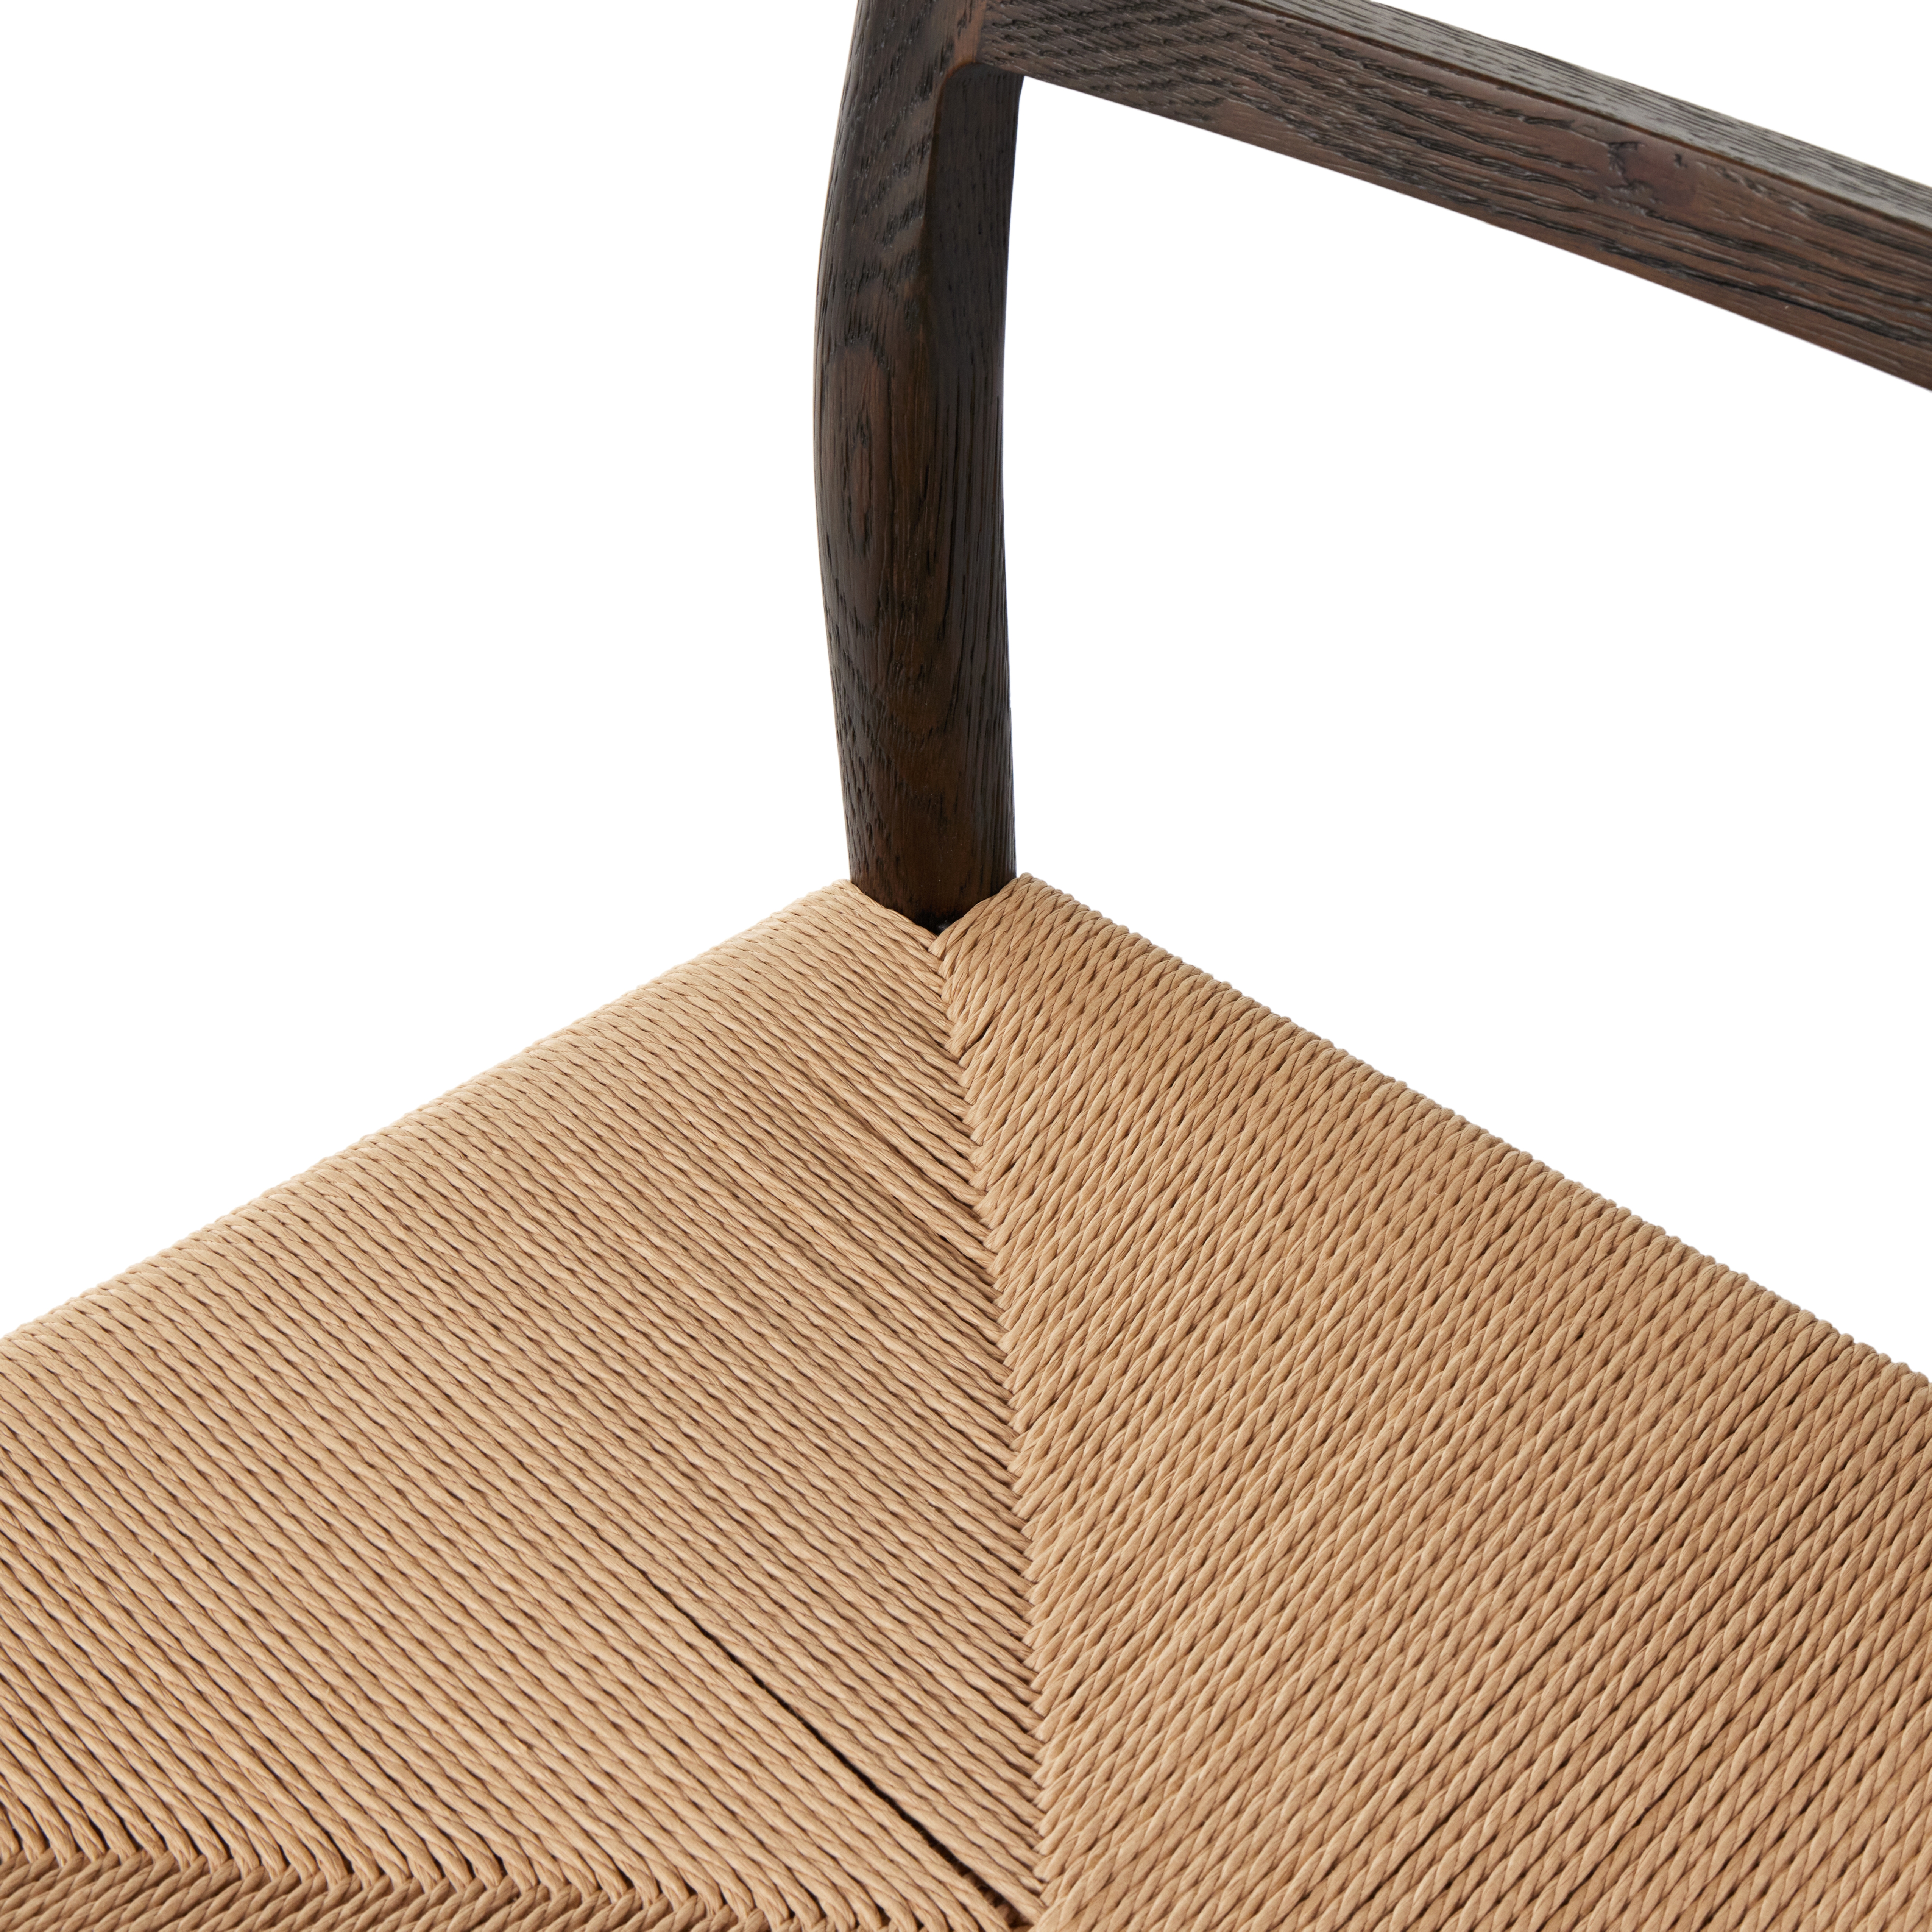 Glenmore Woven Dining Chair-Light Carbon - Image 7